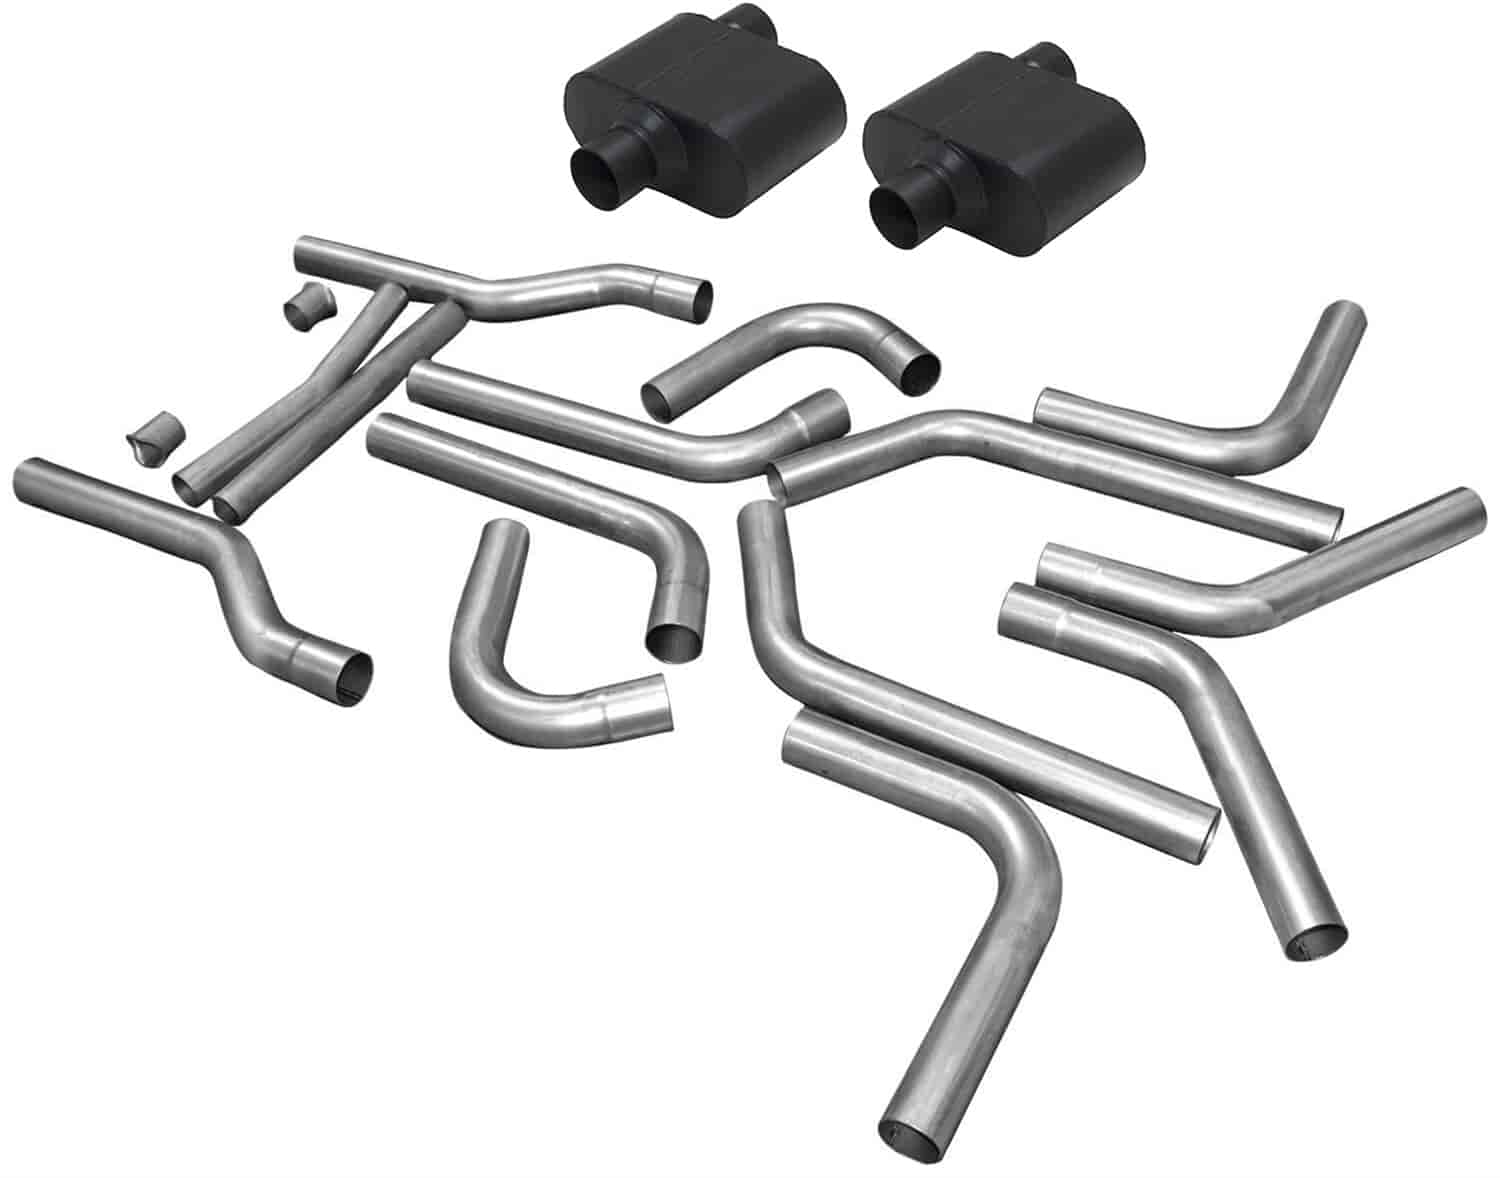 Super 10 Series Delta Flow Mufflers and U-Fit Dual Exhaust Pipe Kit